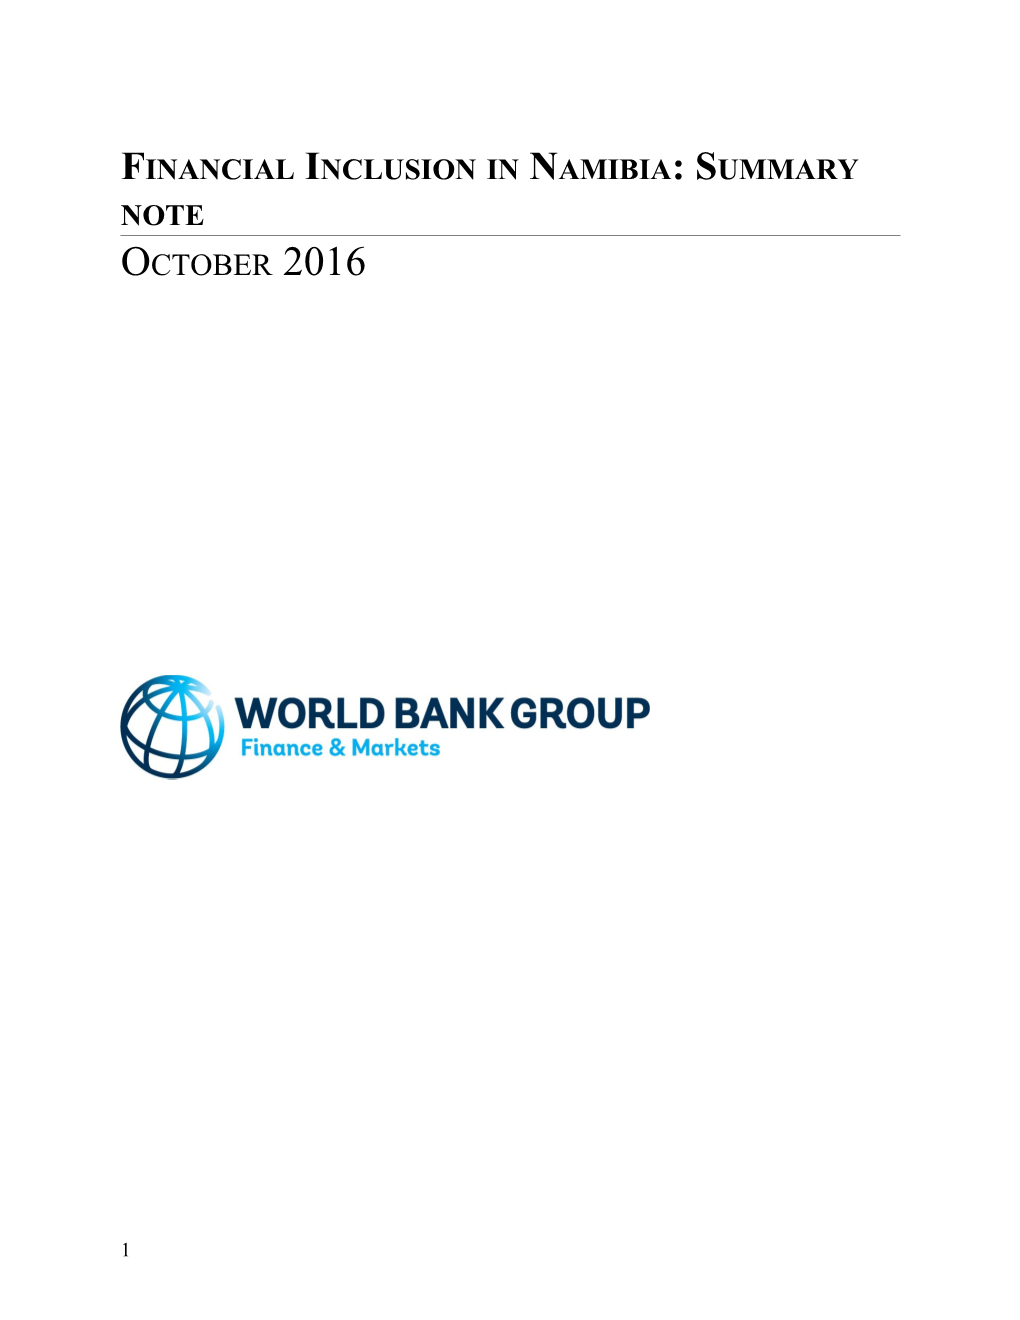 Financial Inclusion in Namibia: Summary Note